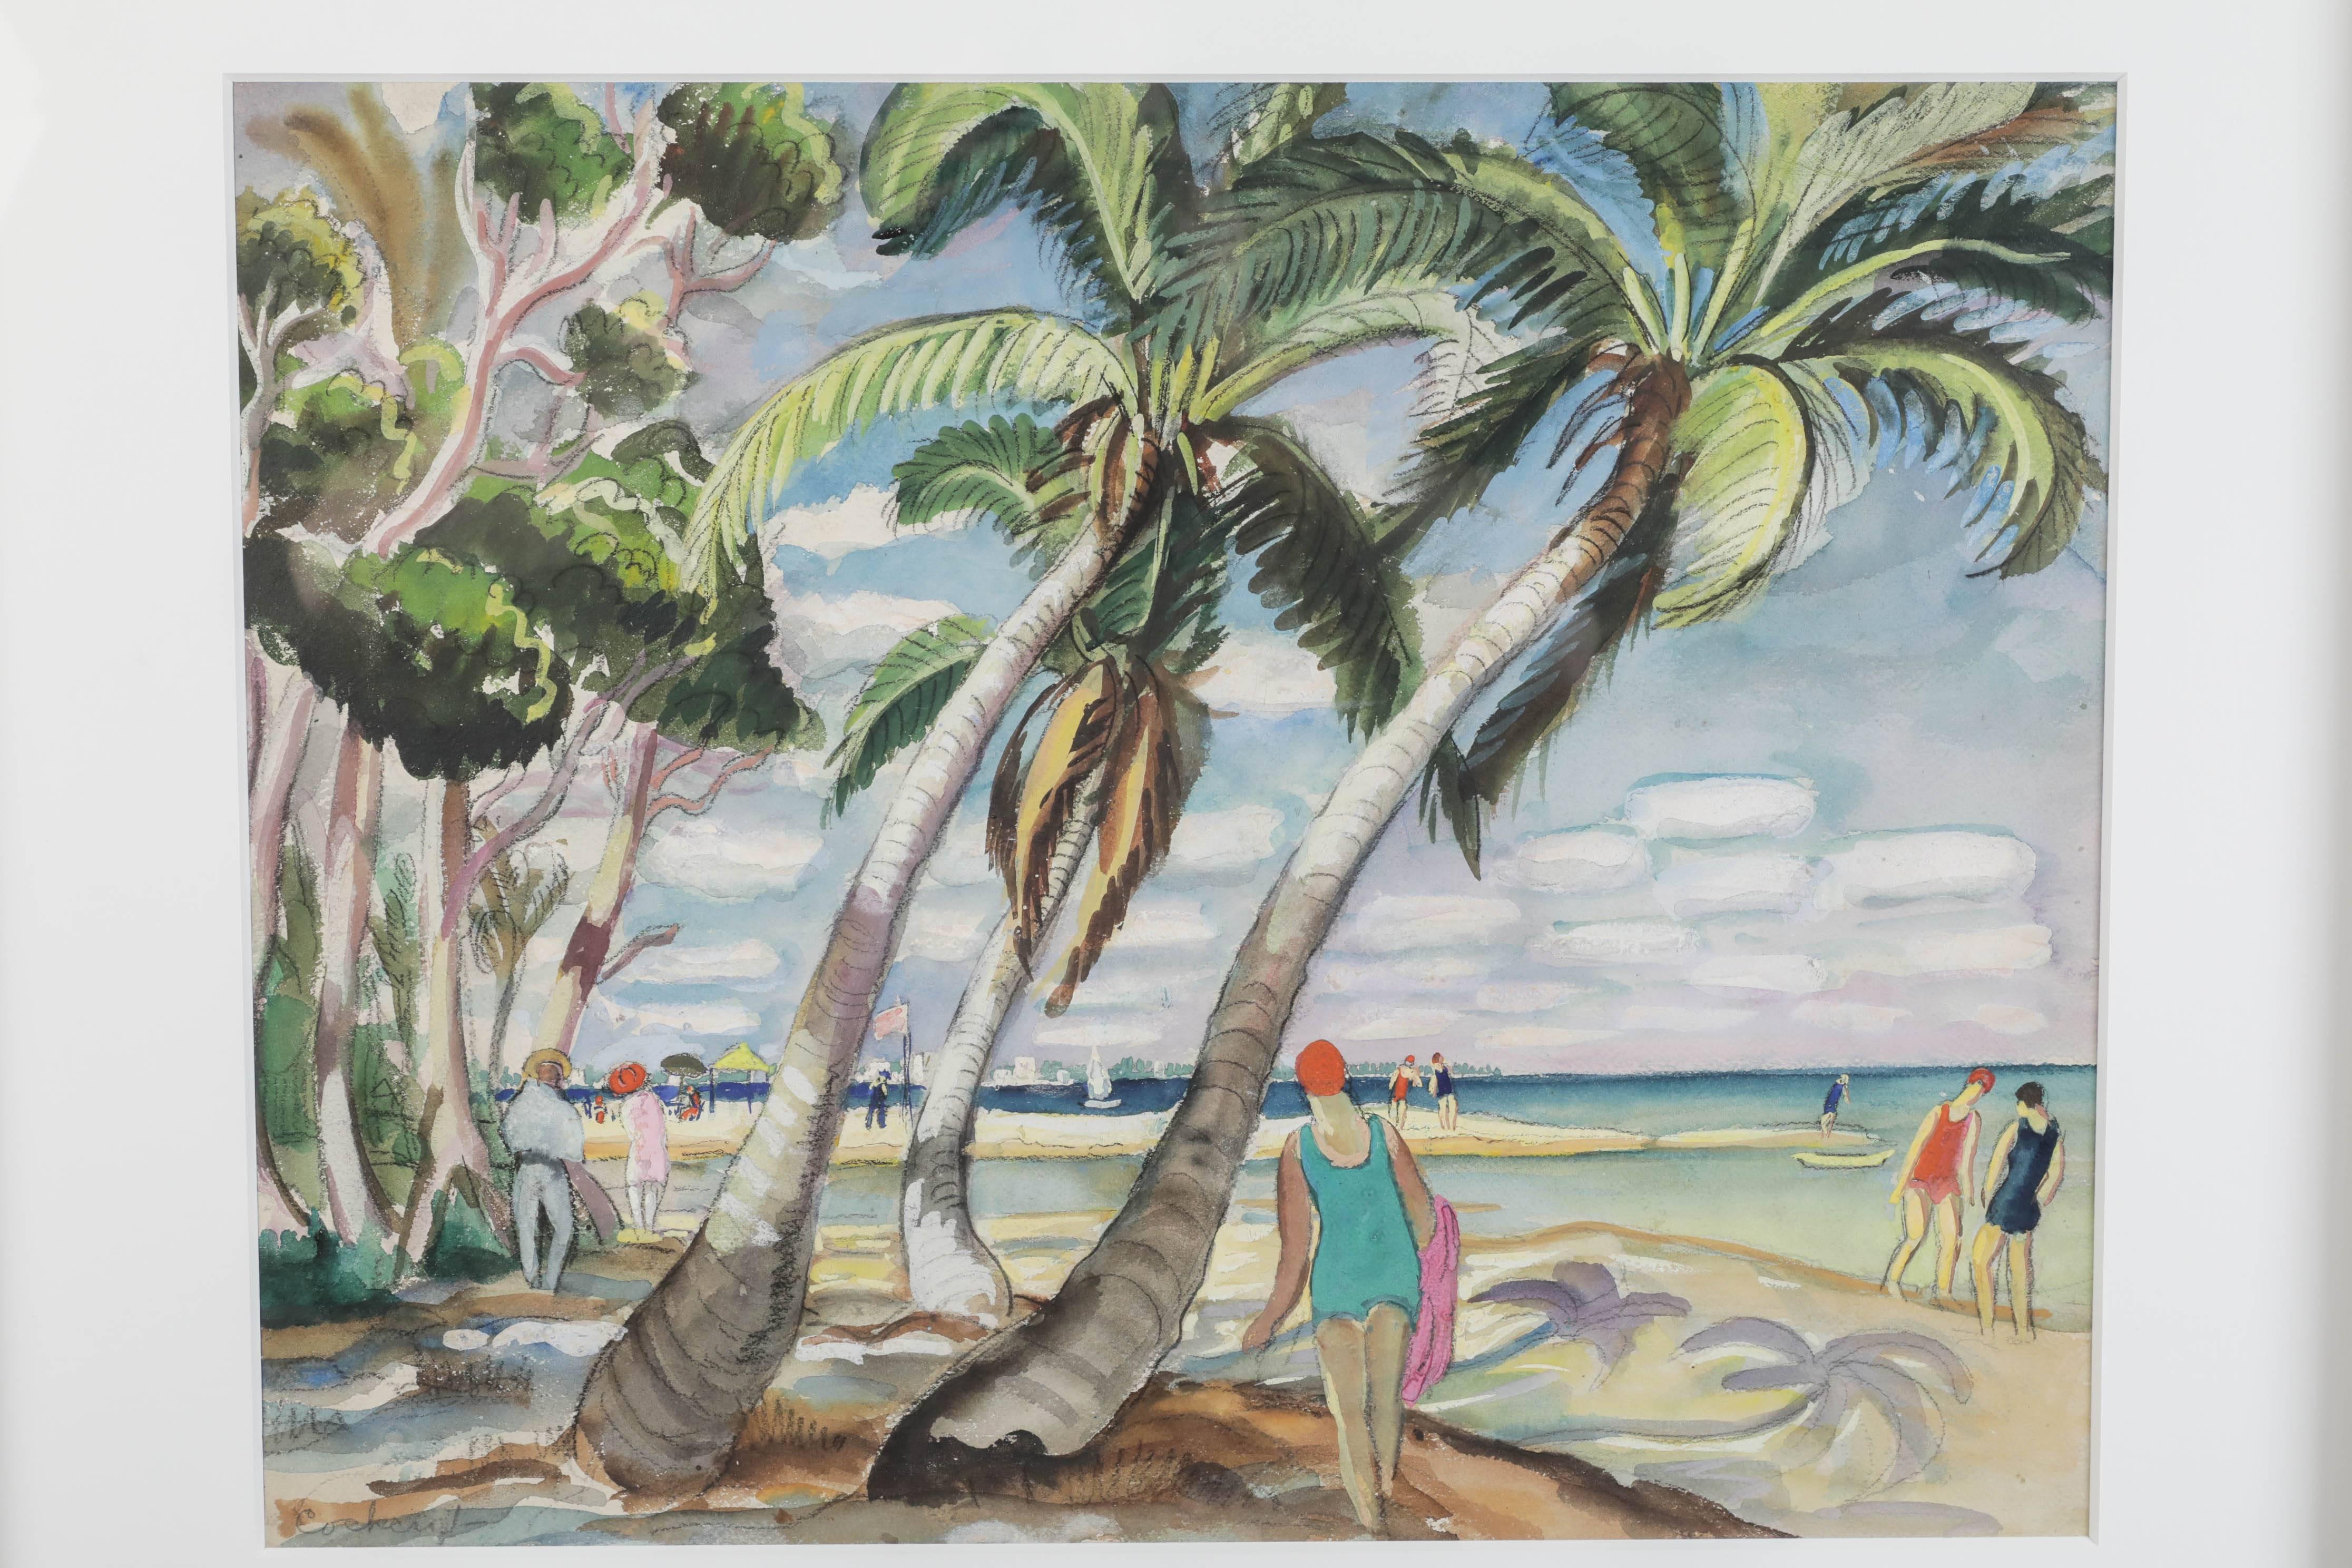 This wonderful gouache piece is very evocative of 1930s resort fun at the beach, somewhere. She was a student of Matisse during her frequent stays in the south of France. The colors are full and bright. It is newly framed.